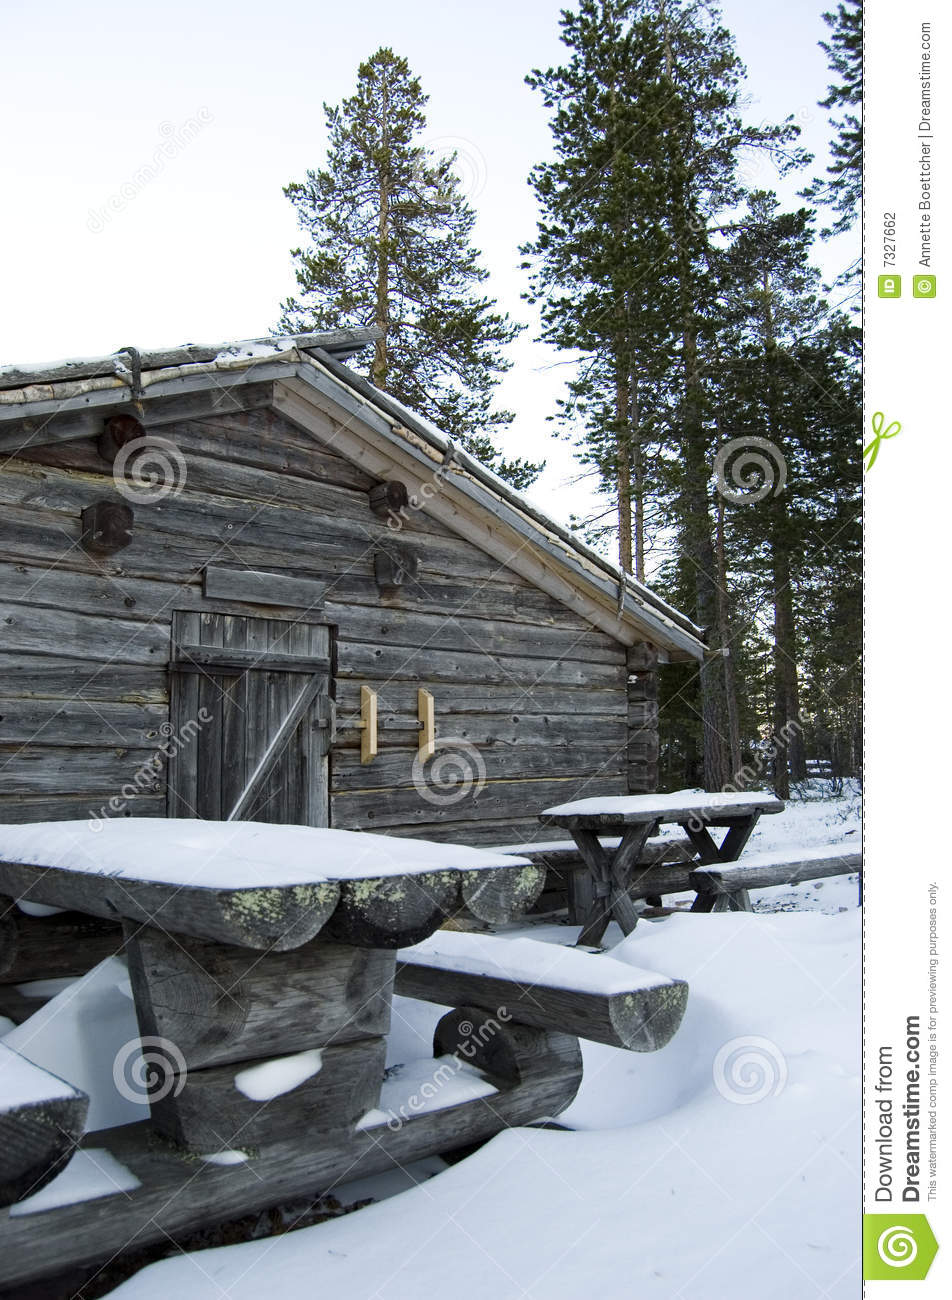 Wooden Log Cabin With Snow Covered Rustic Benches And Tables In The